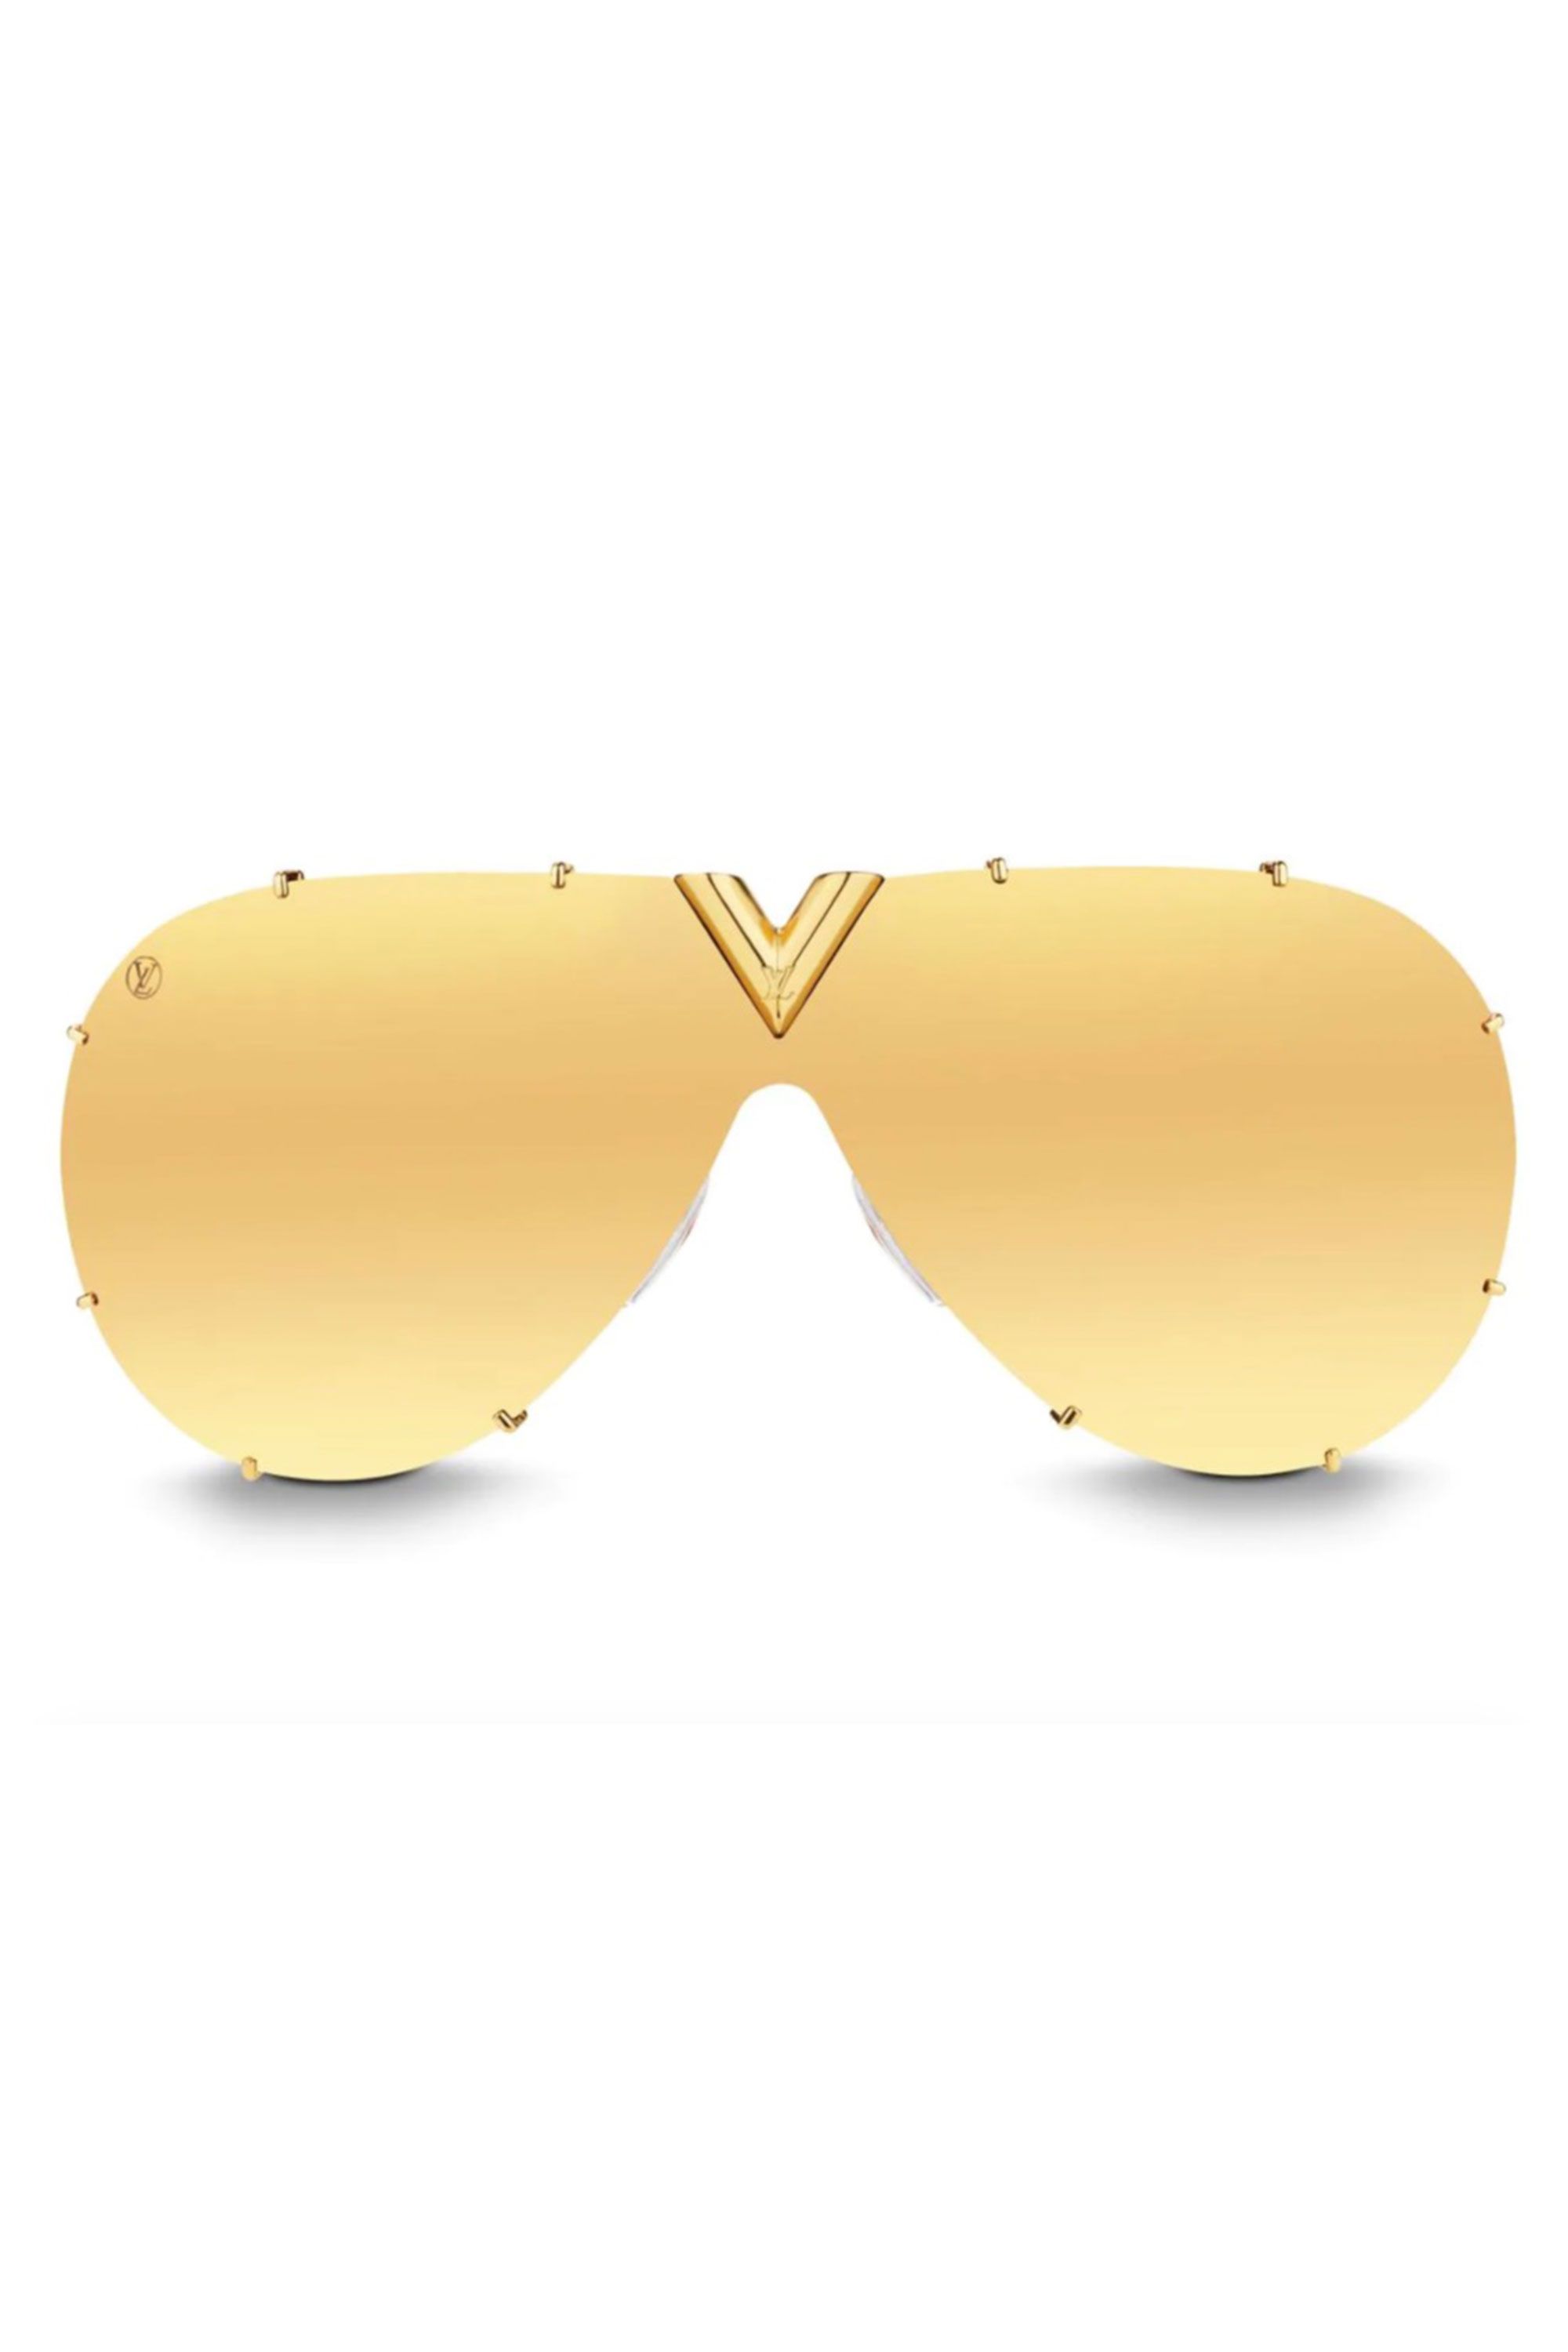 Oversized sunglasses to wear if you dare this summer – Ski goggle-inspired  sunglasses